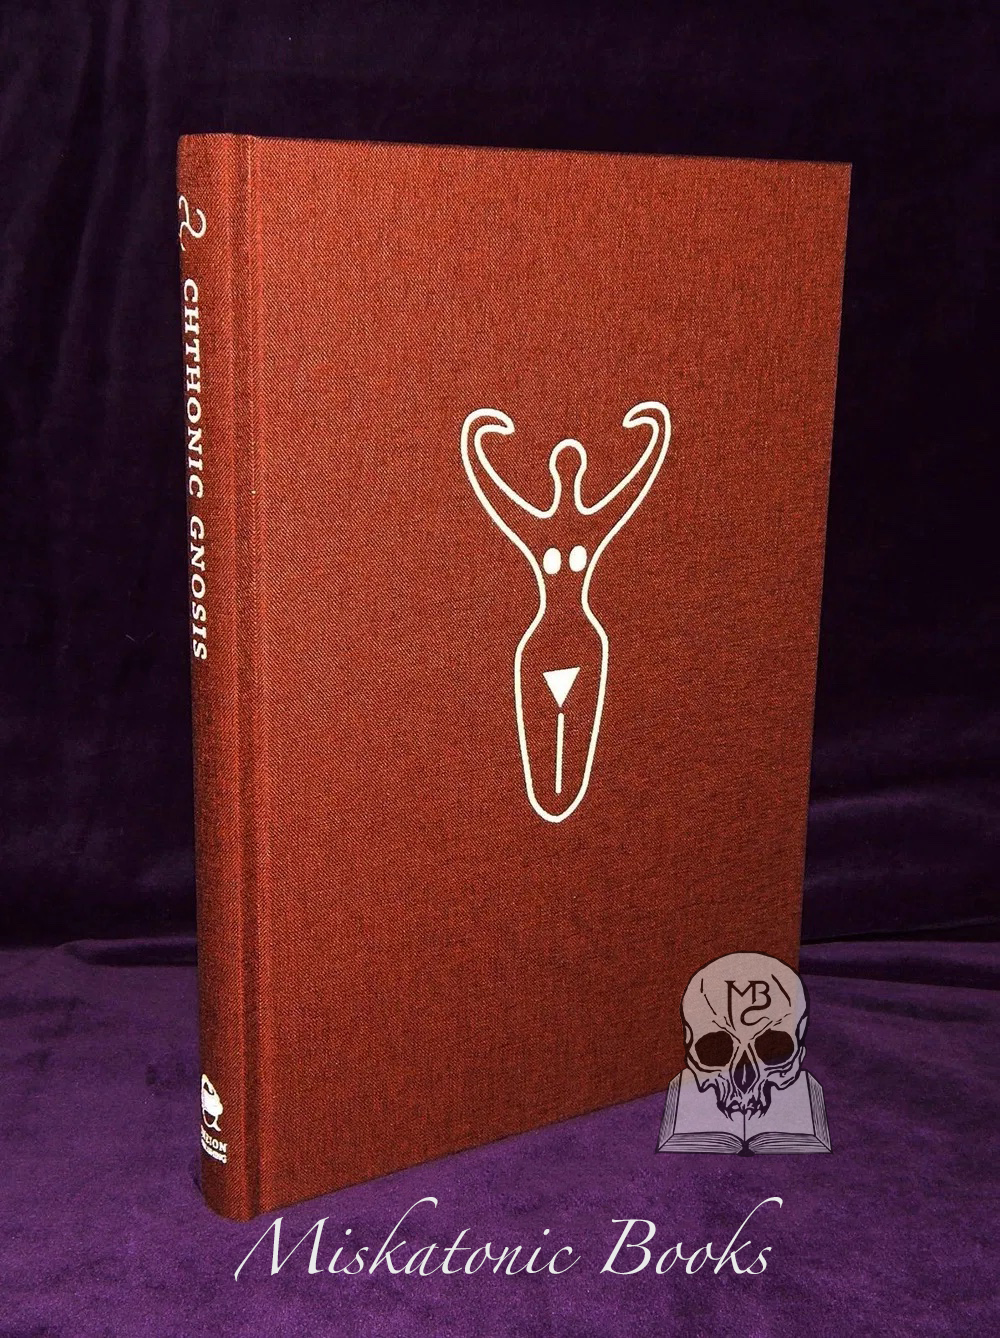 CHTHONIC GNOSIS: Ludwig Klages and his Quest for the Pandaemonic All by Dr. Gunnar Alksnis (Limited Edition Hardcover)